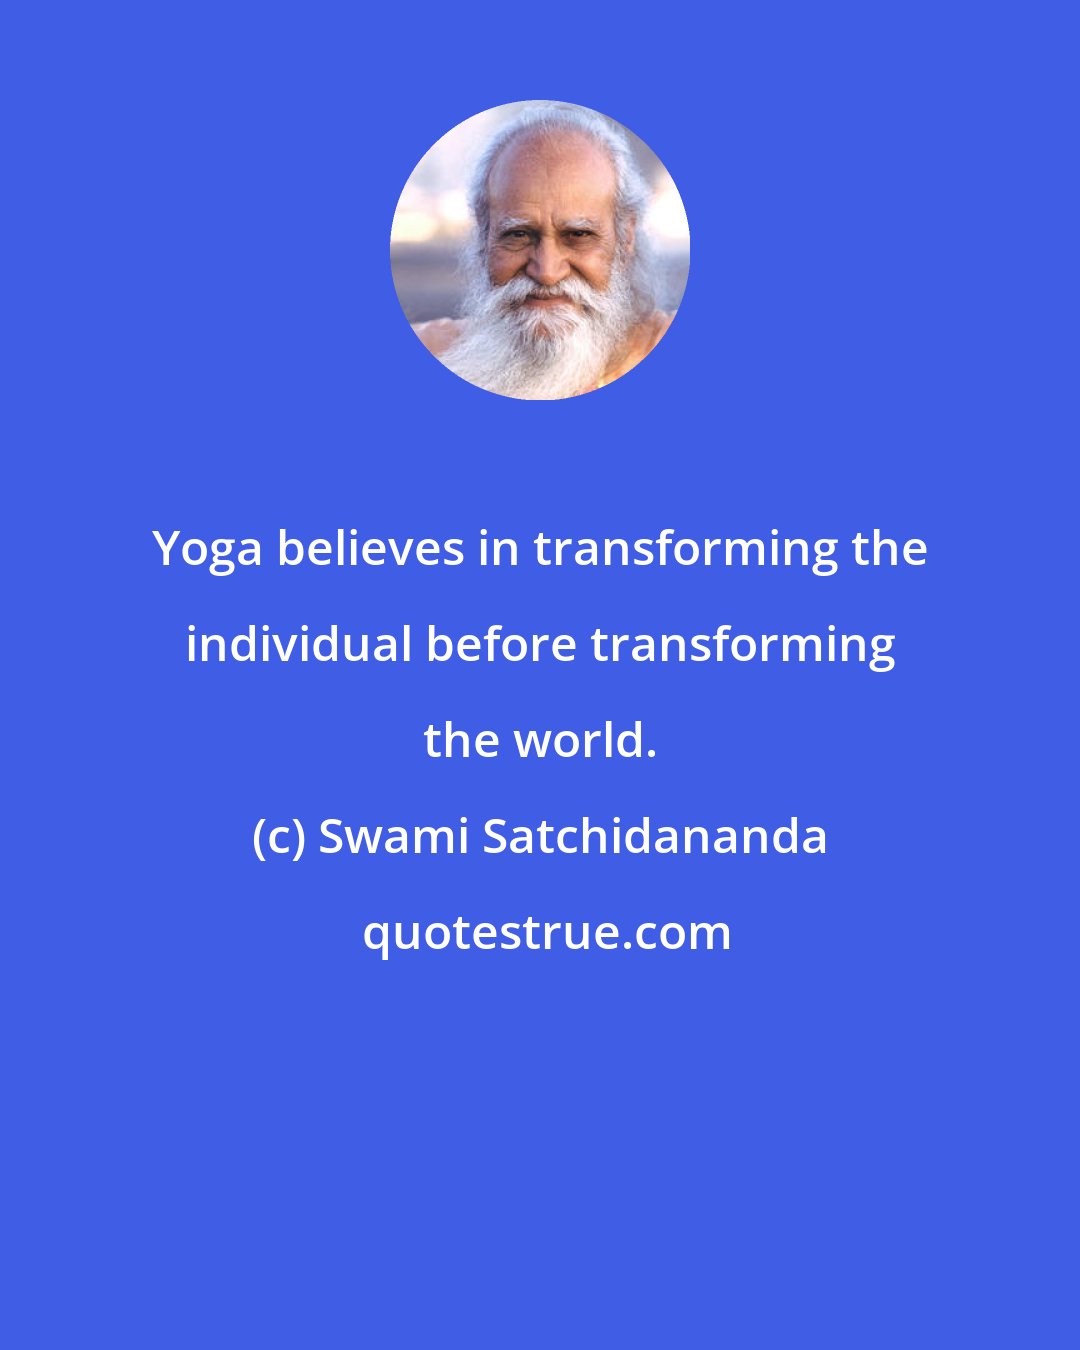 Swami Satchidananda: Yoga believes in transforming the individual before transforming the world.